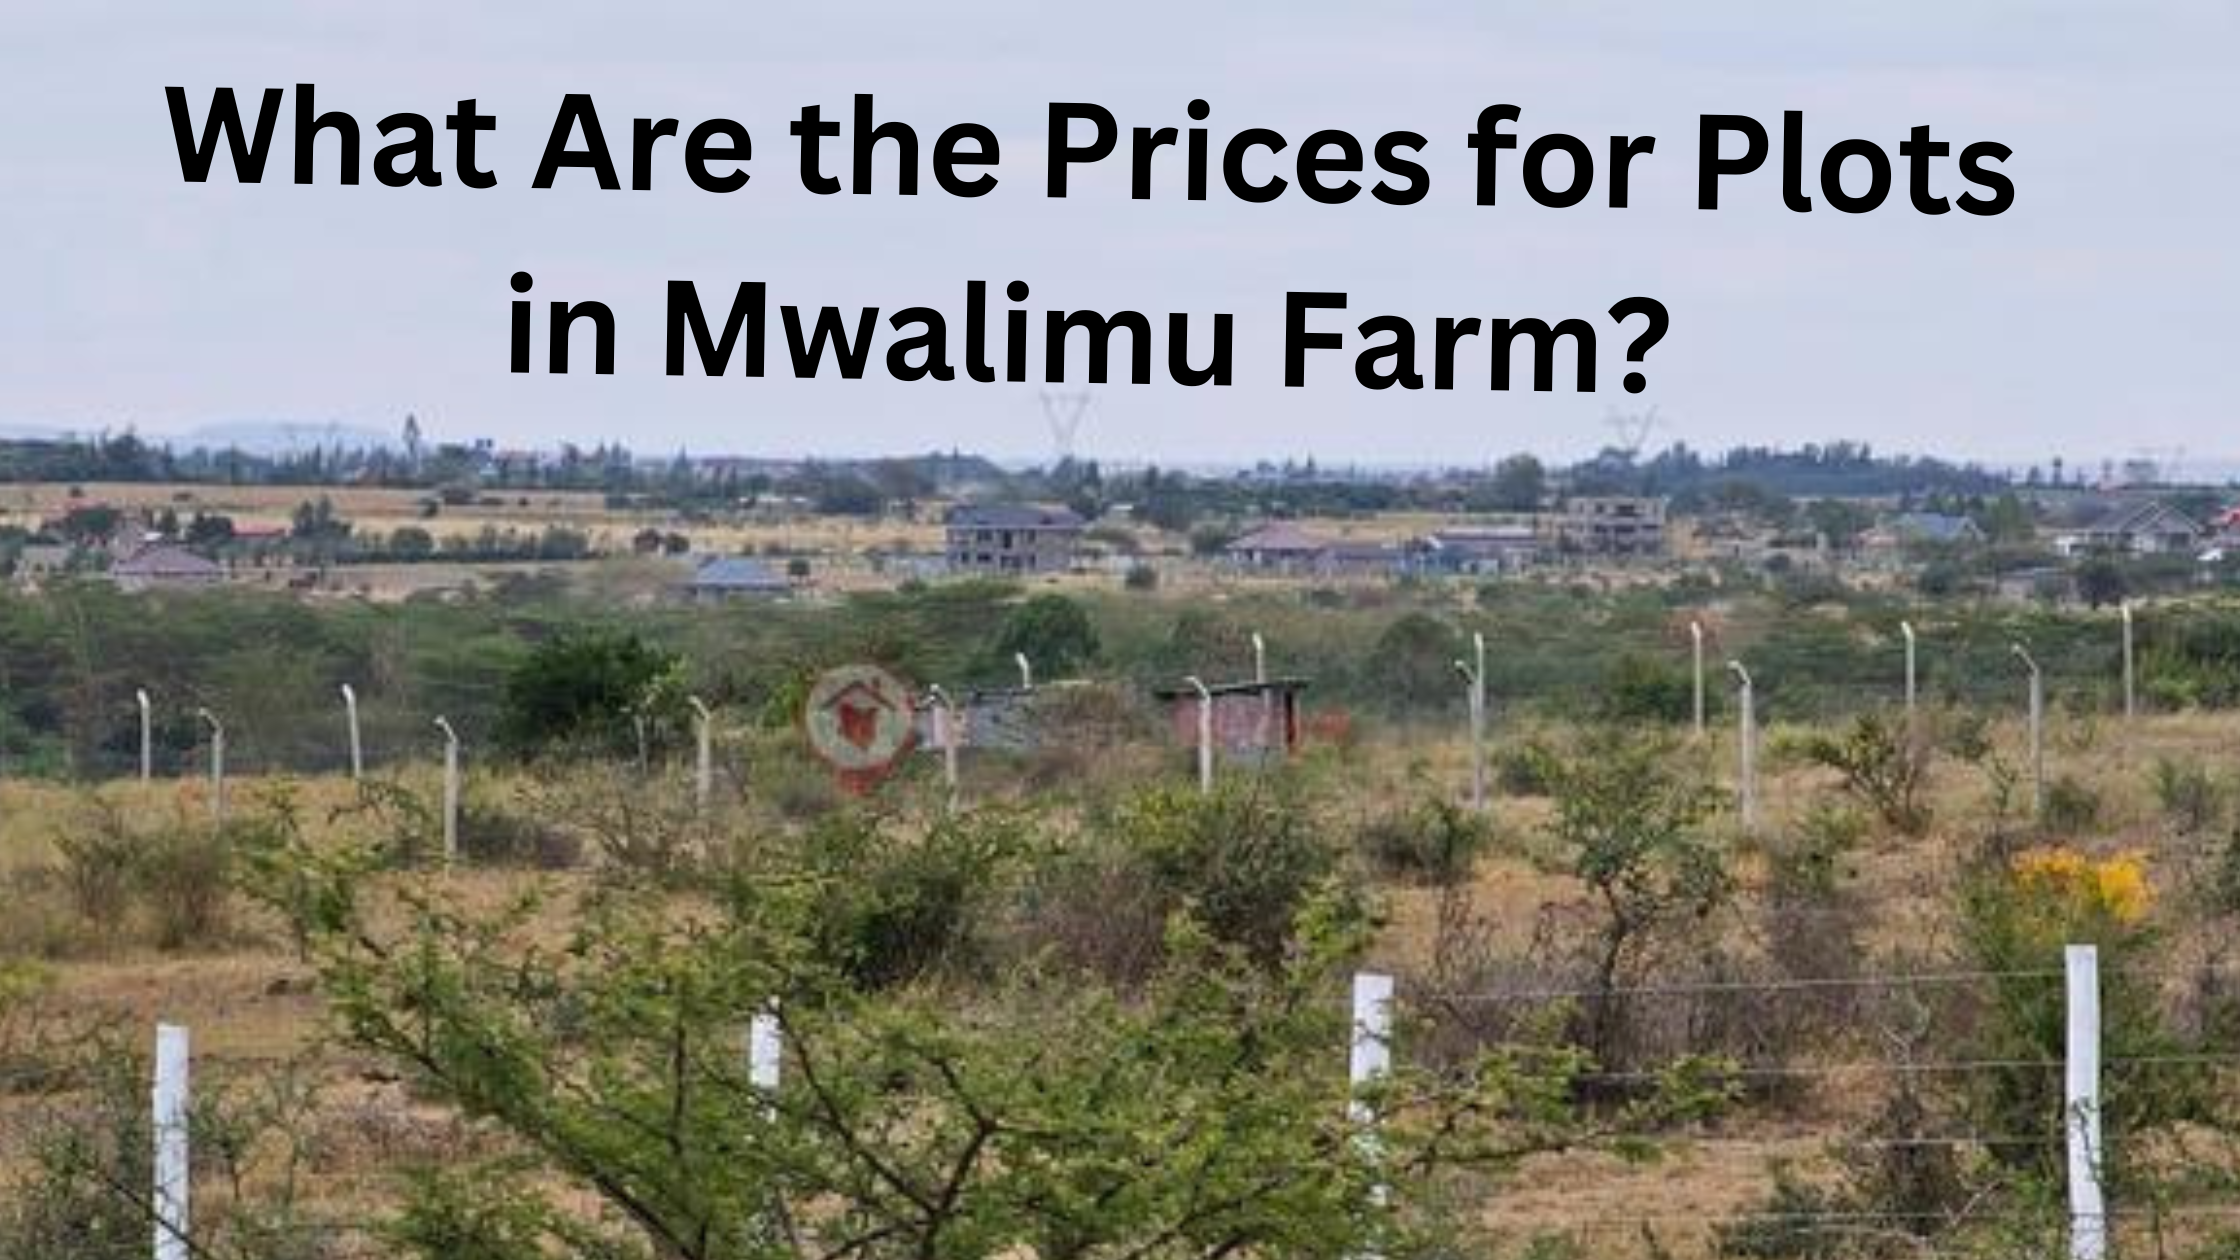 What Are the Prices for Plots in Mwalimu Farm?
Mwalimu Farm Community.